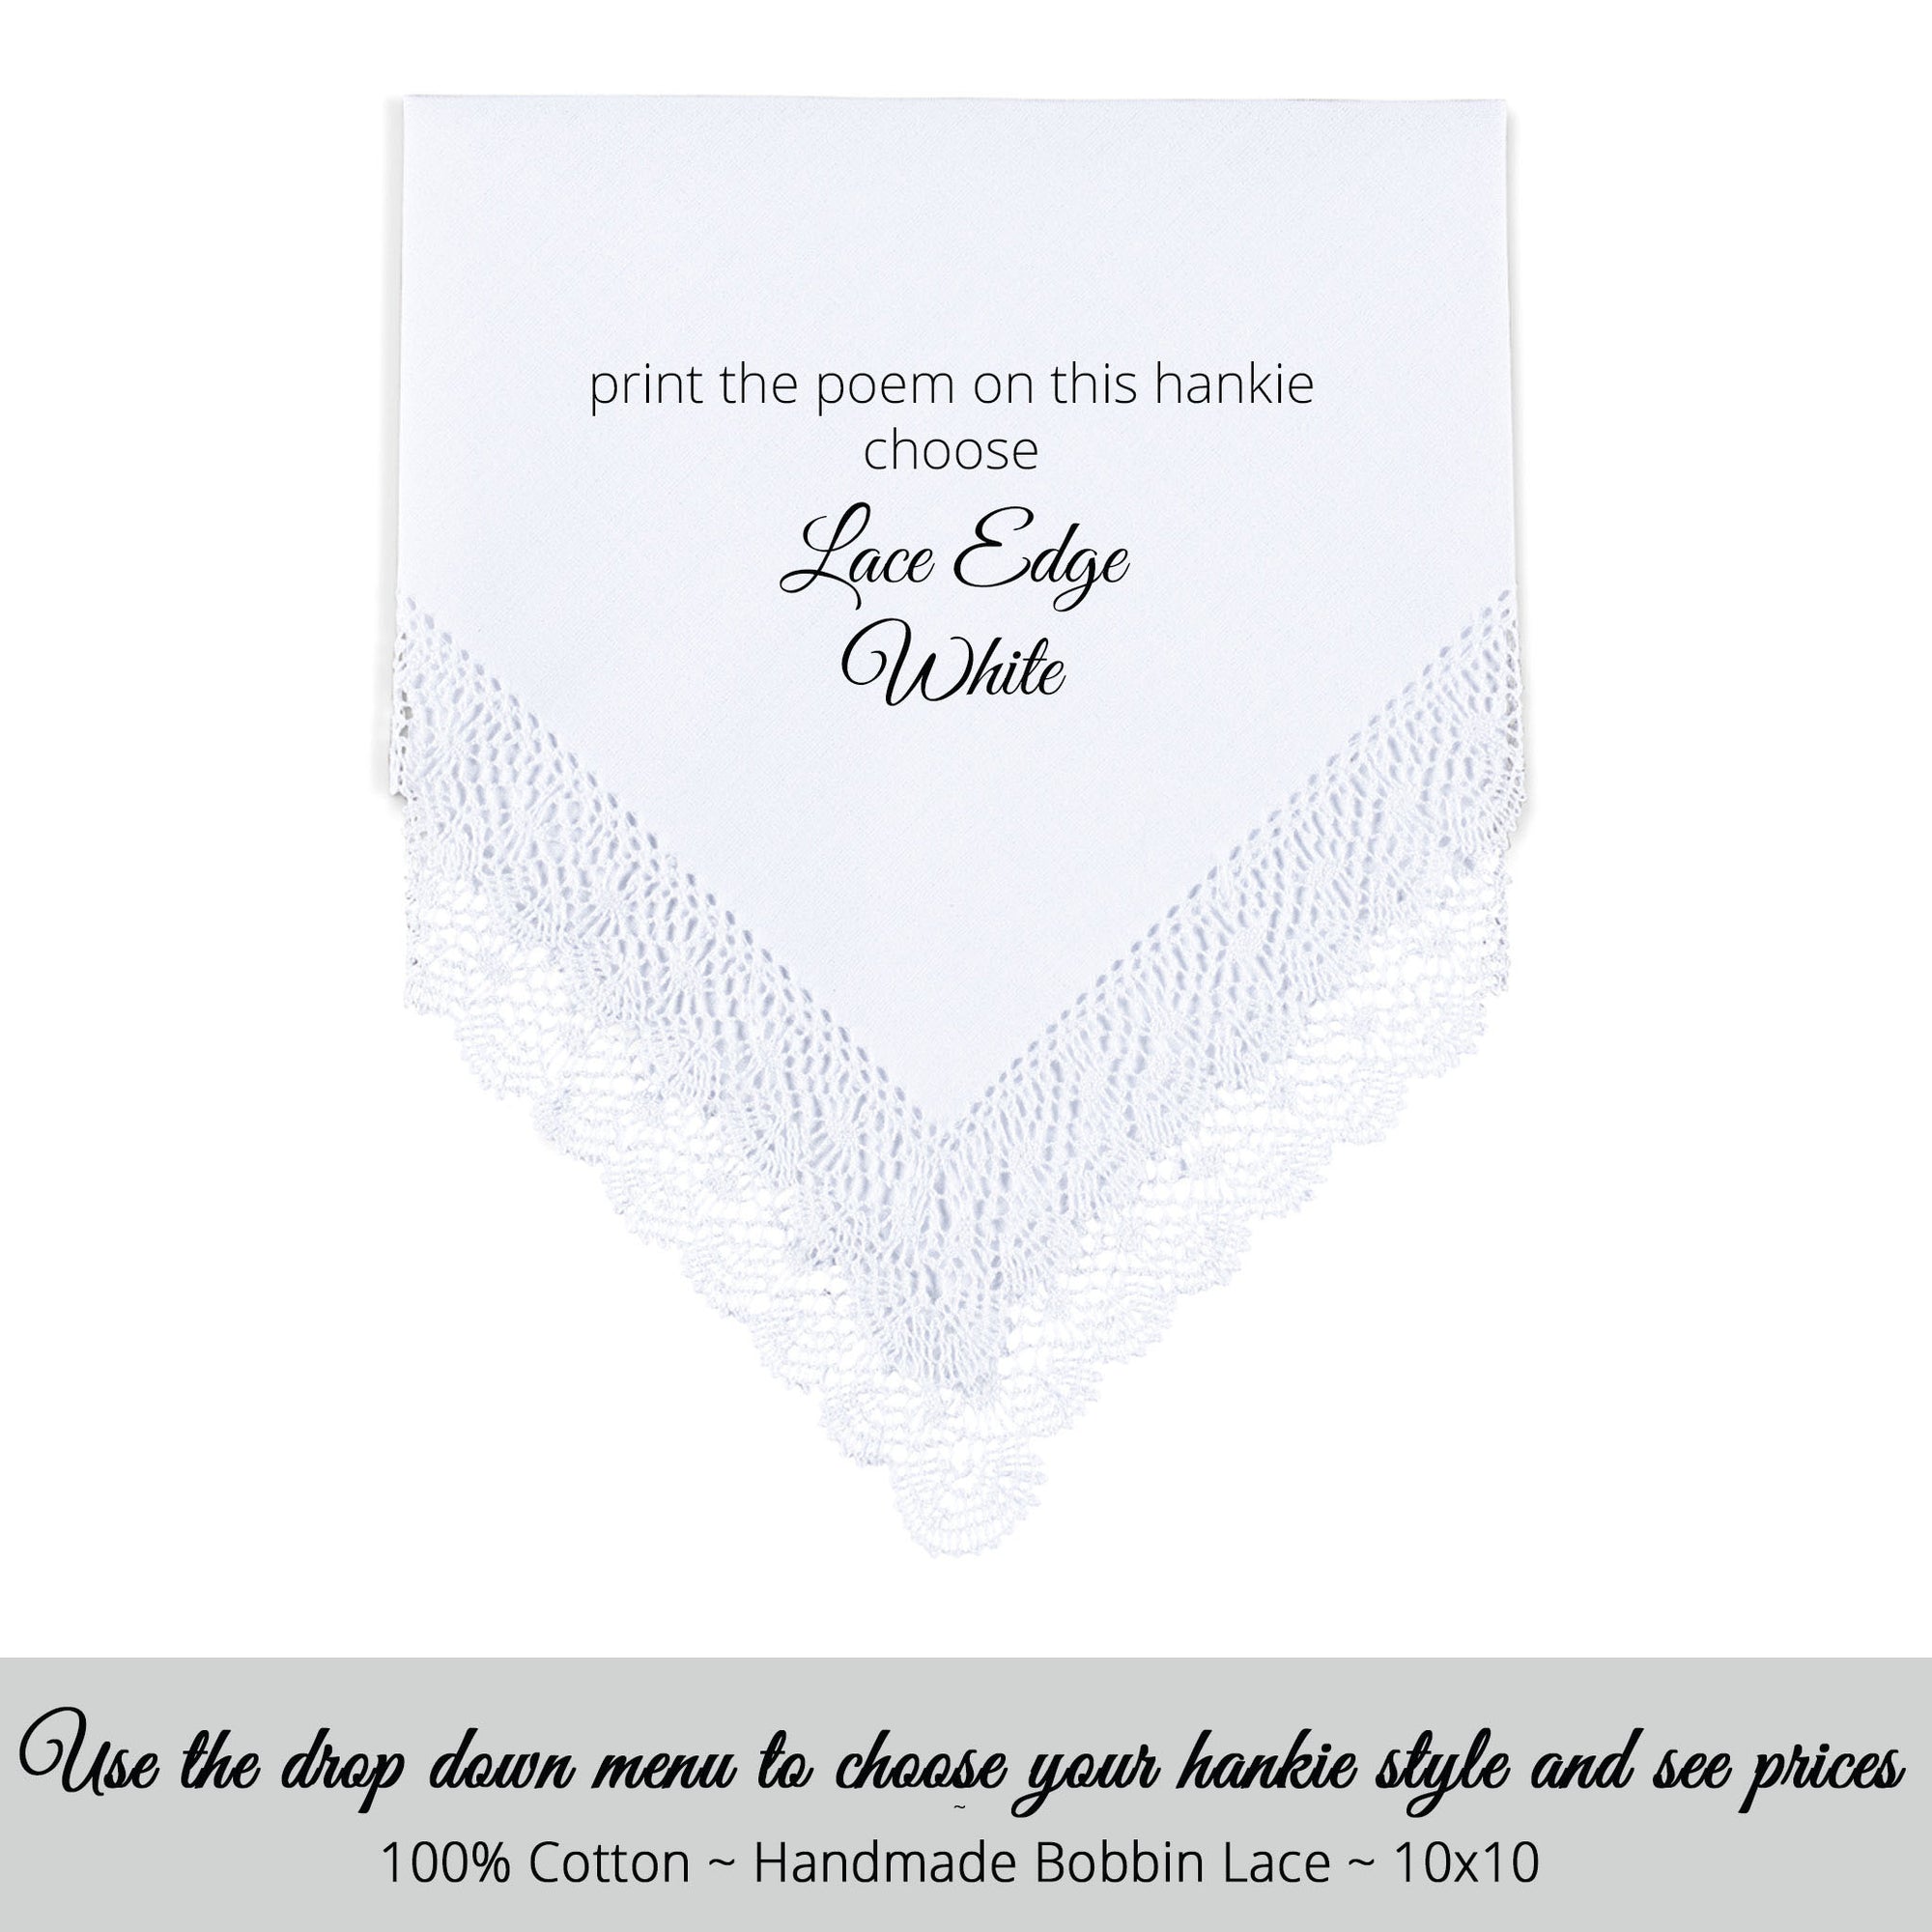 Wedding Handkerchief white with bobbin lace hankie for the parents of the bride